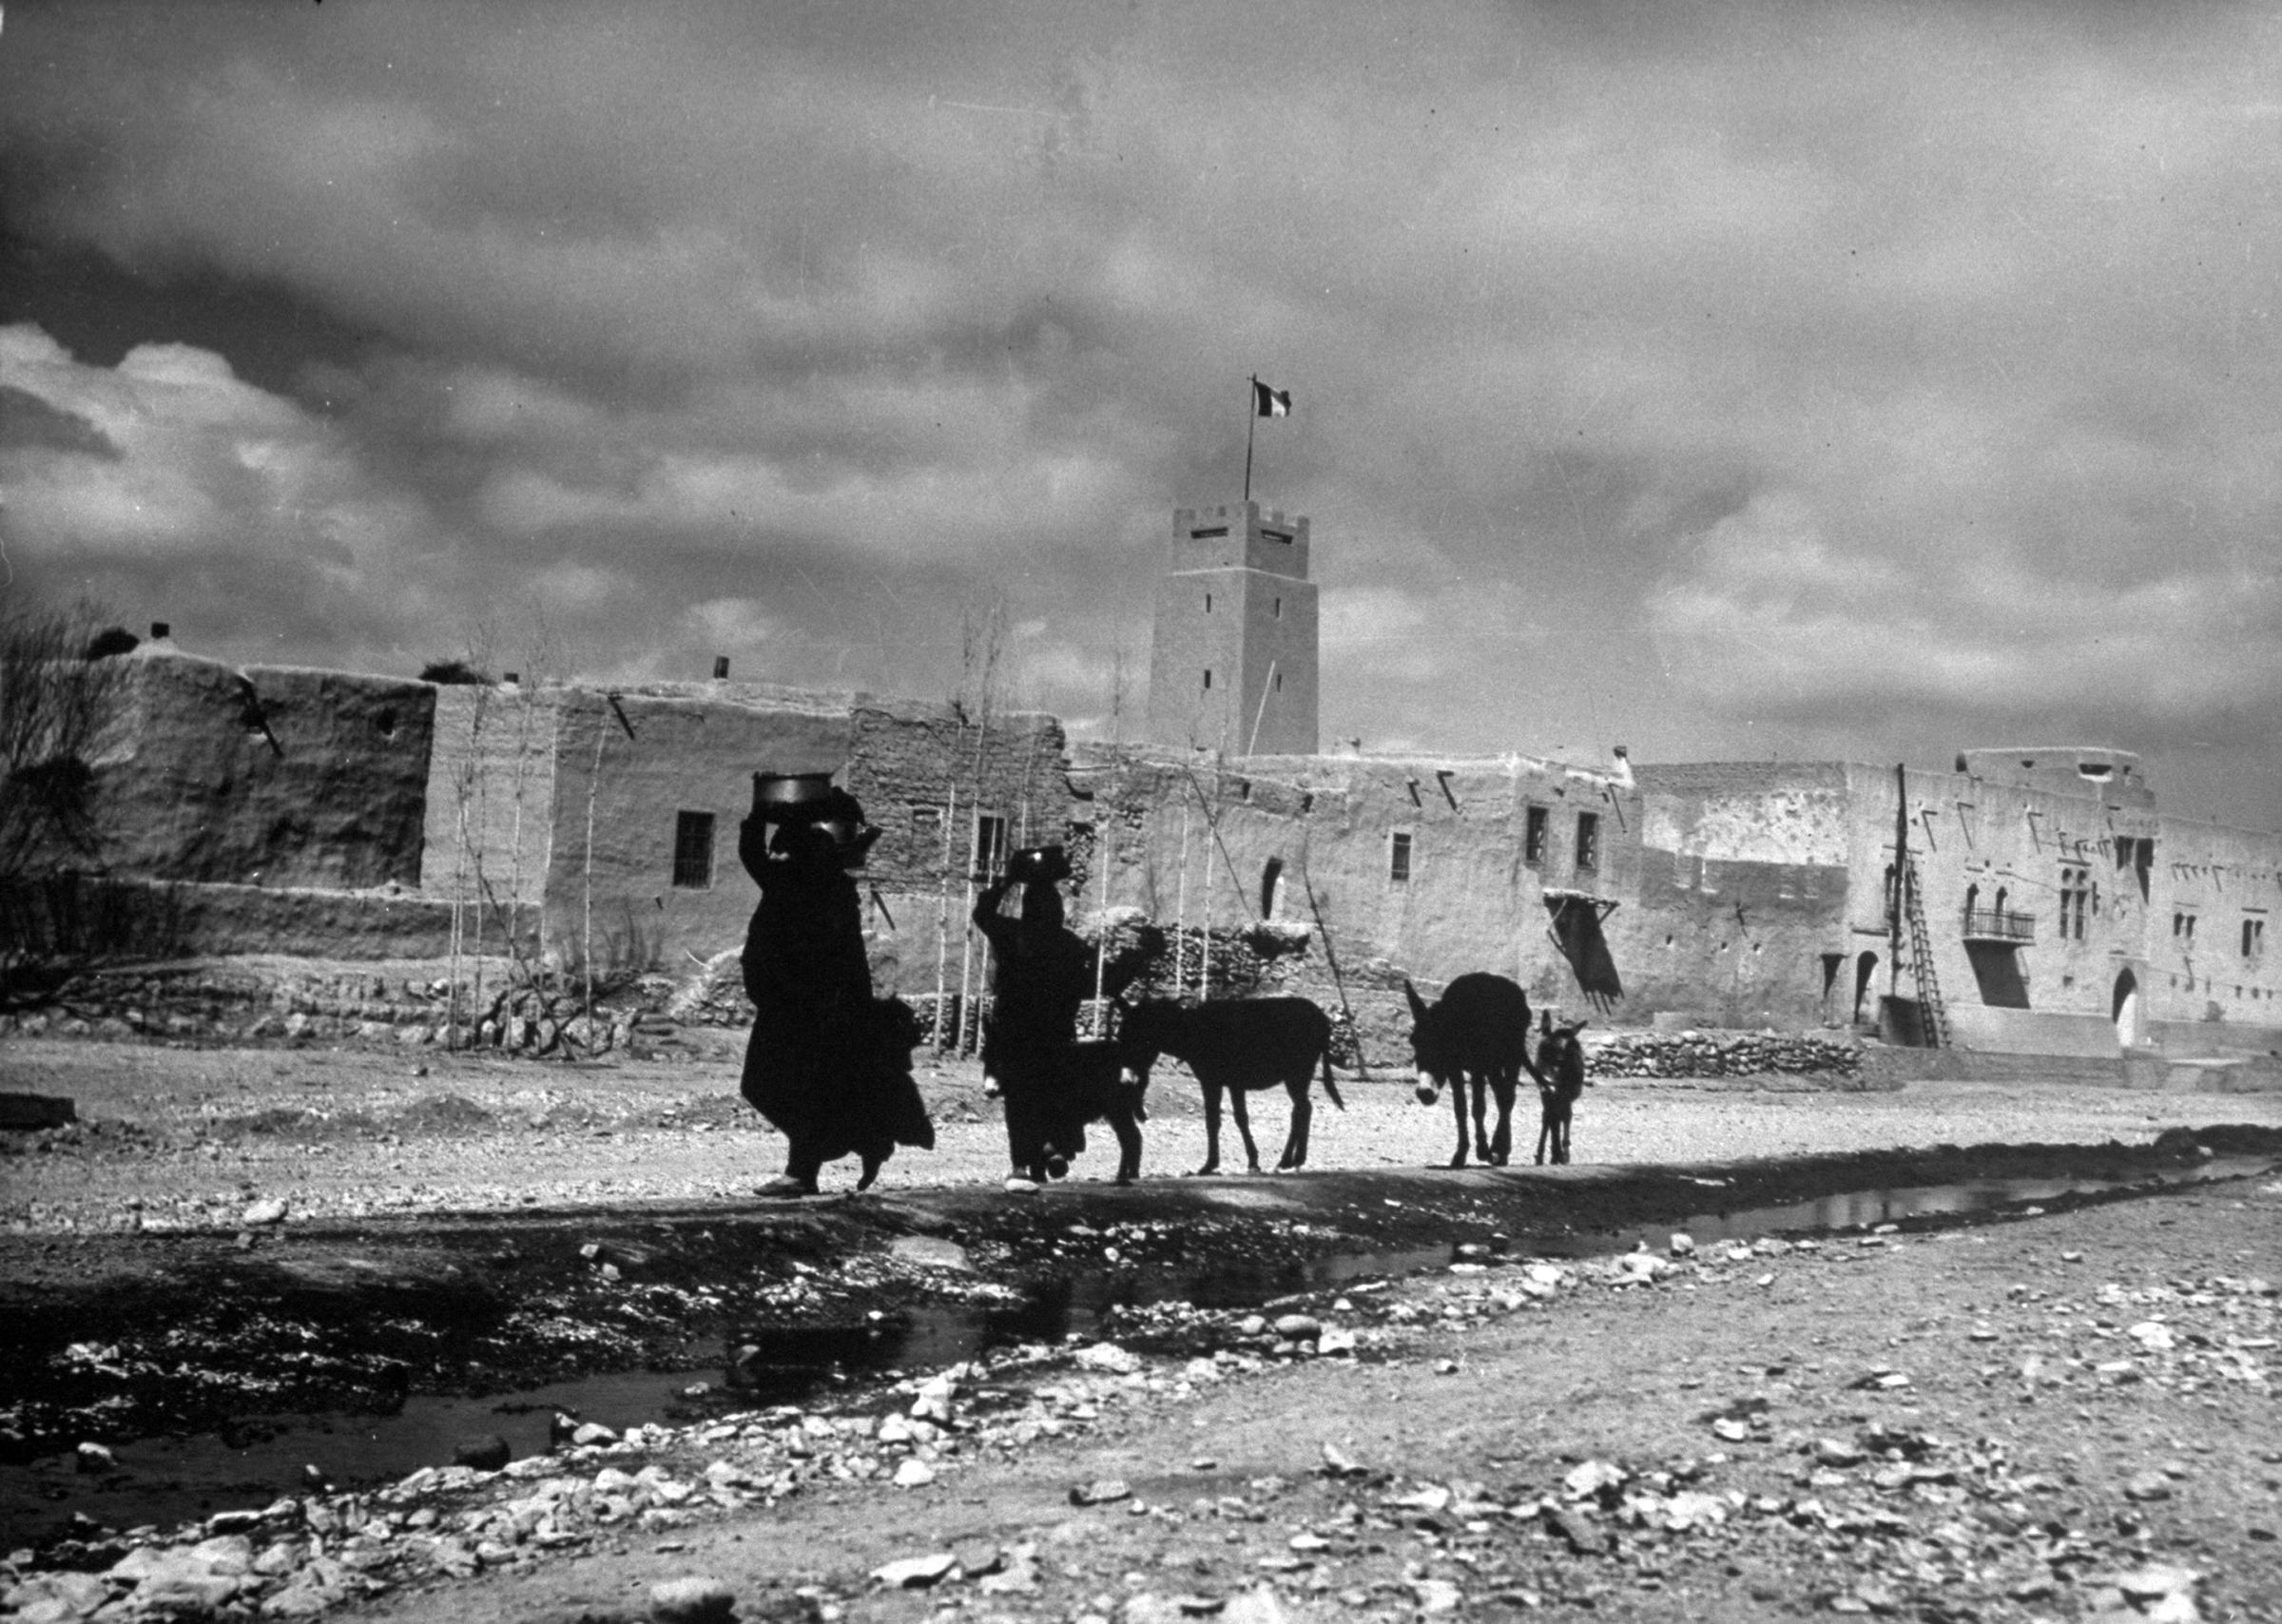 Women carry water containers on their heads as they lead mules along a road in a desert village near Damascus, Syria, 1940.